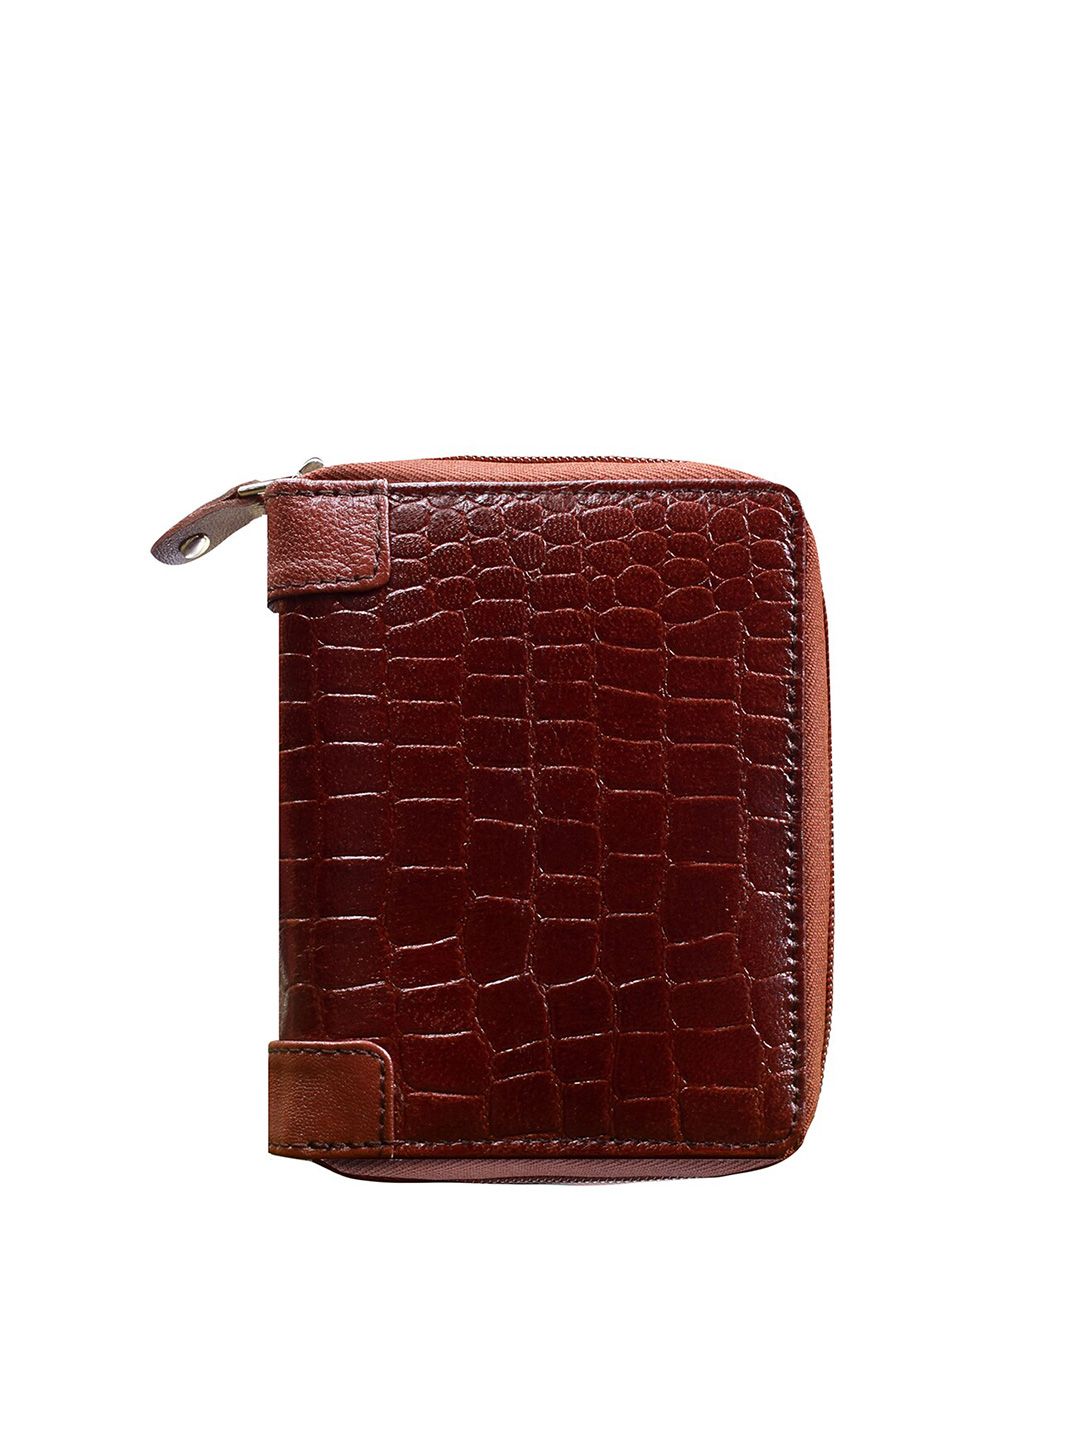 ABYS Unisex Brown Animal Textured Leather Card Holder Price in India